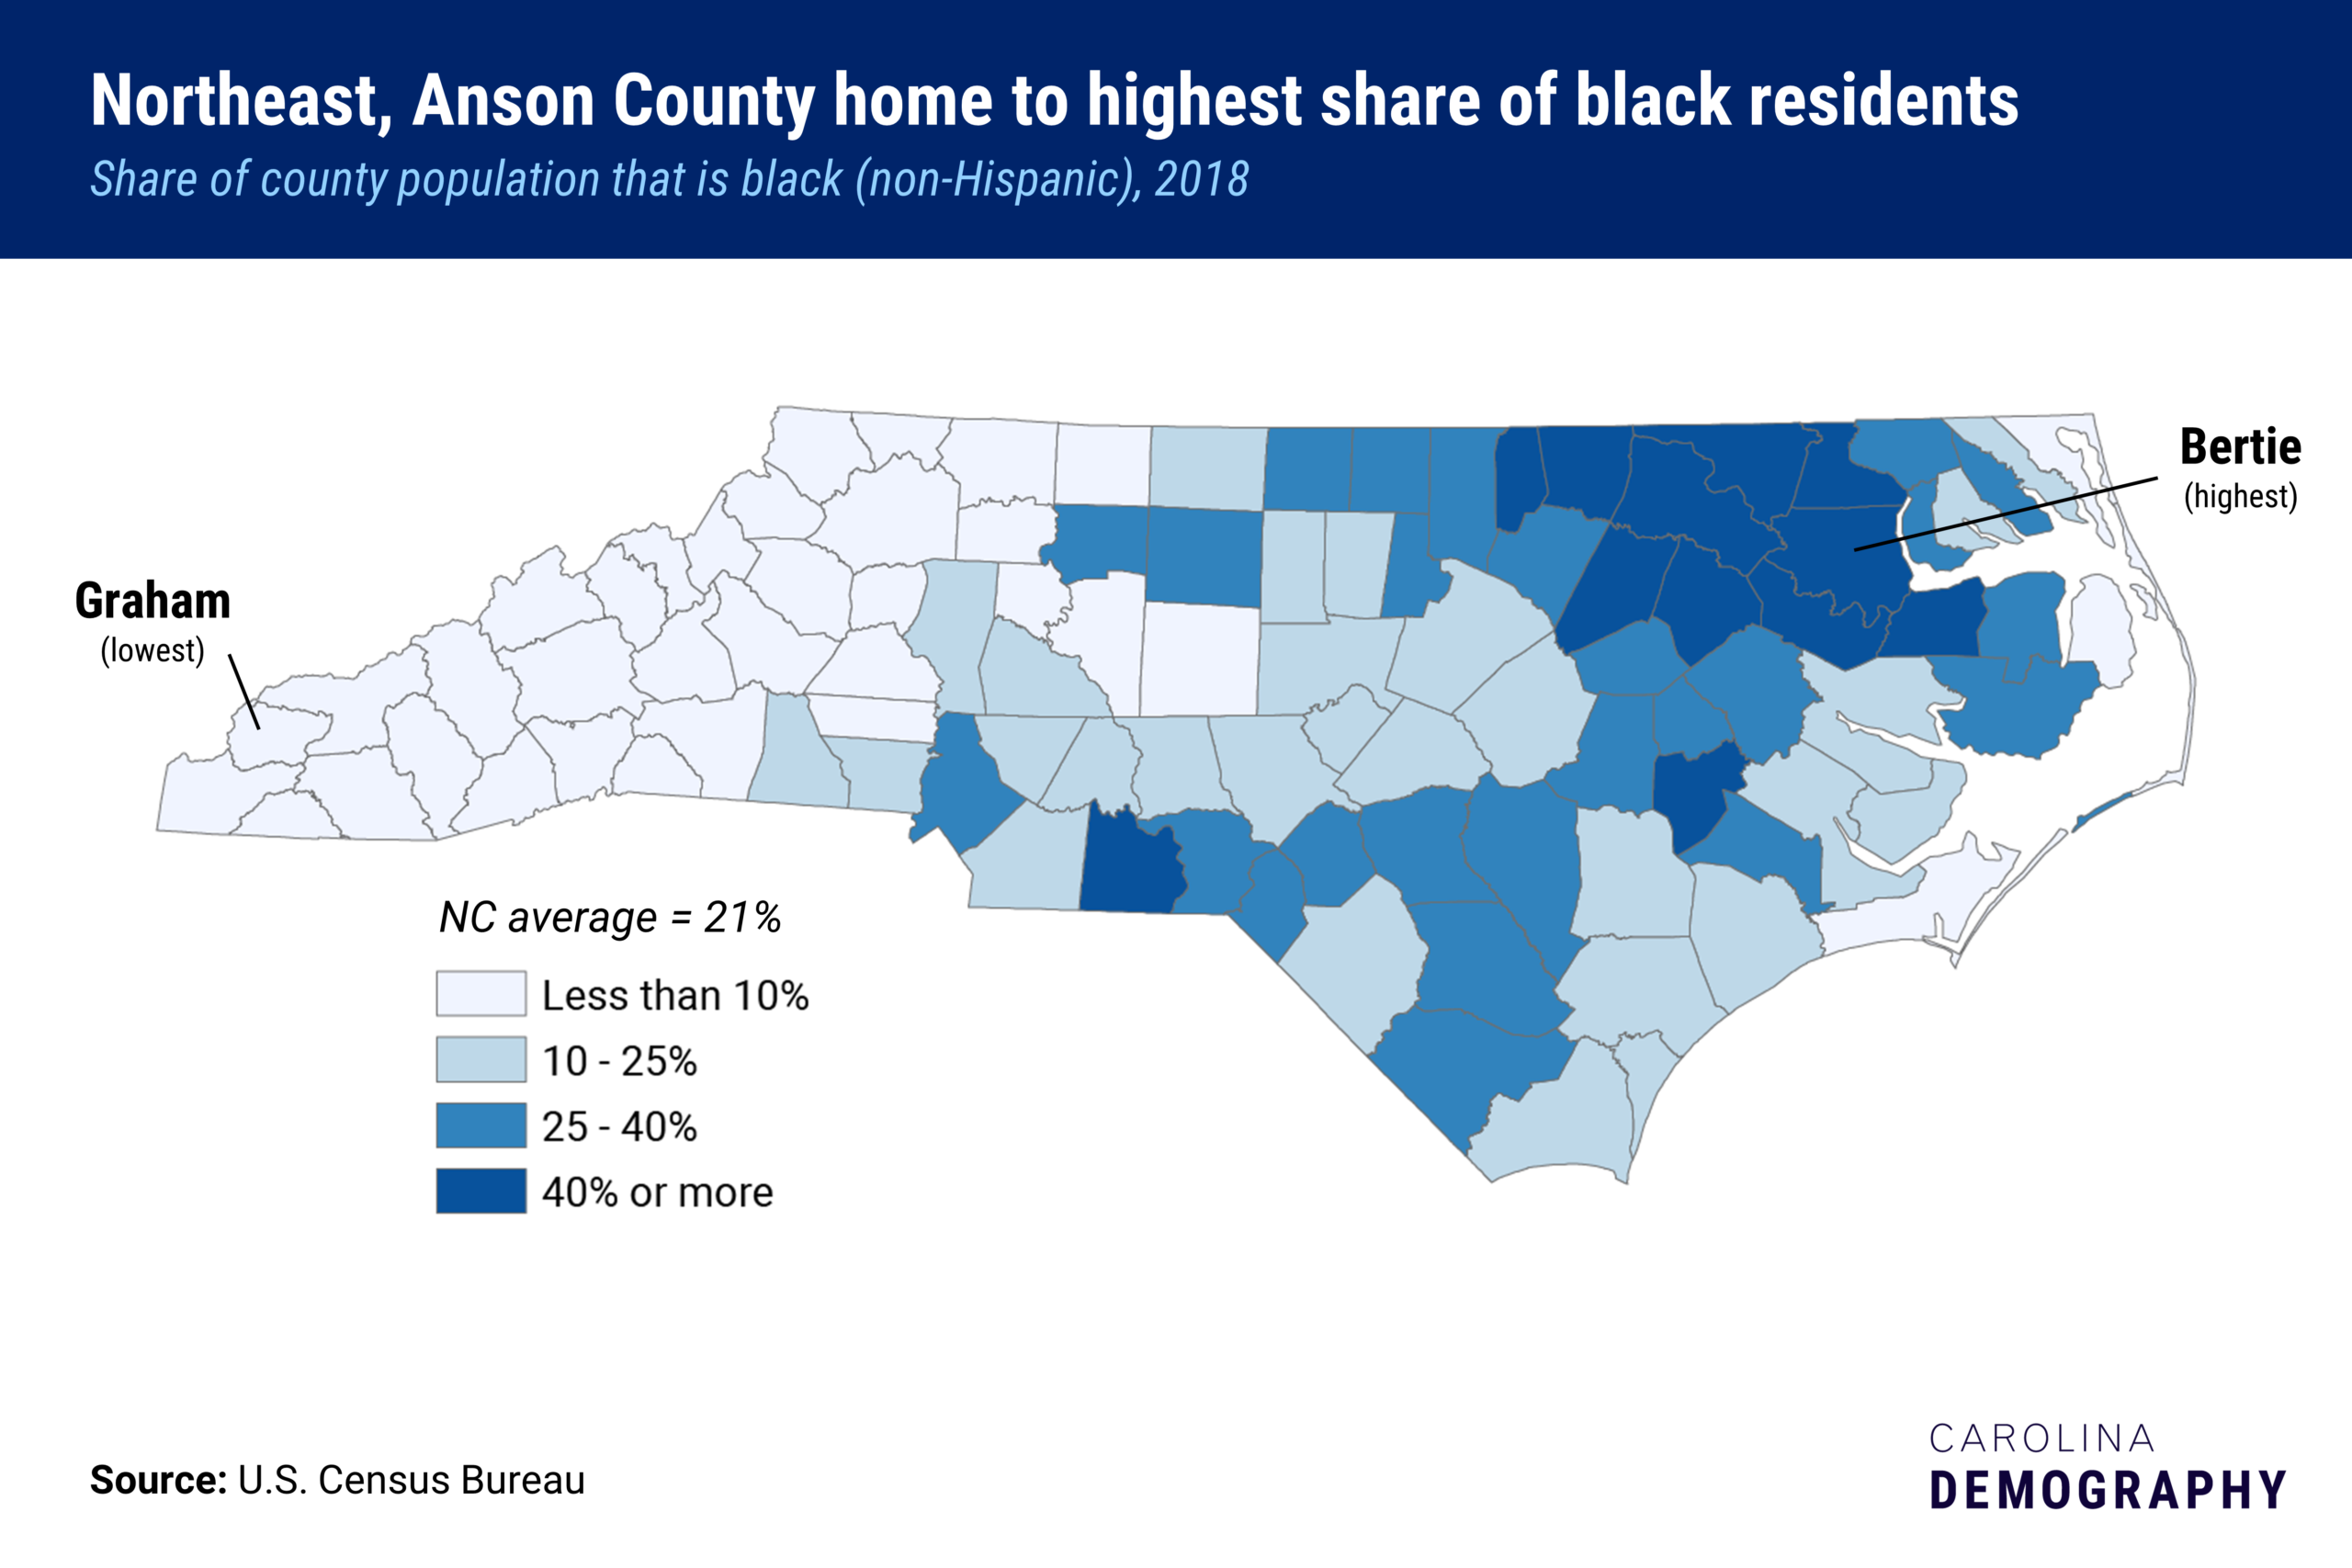 A county map of North Carolina showing the share of county population that is Black. Bertie county has the highest share, where Graham county has the lowest. The state average is 21 percent.